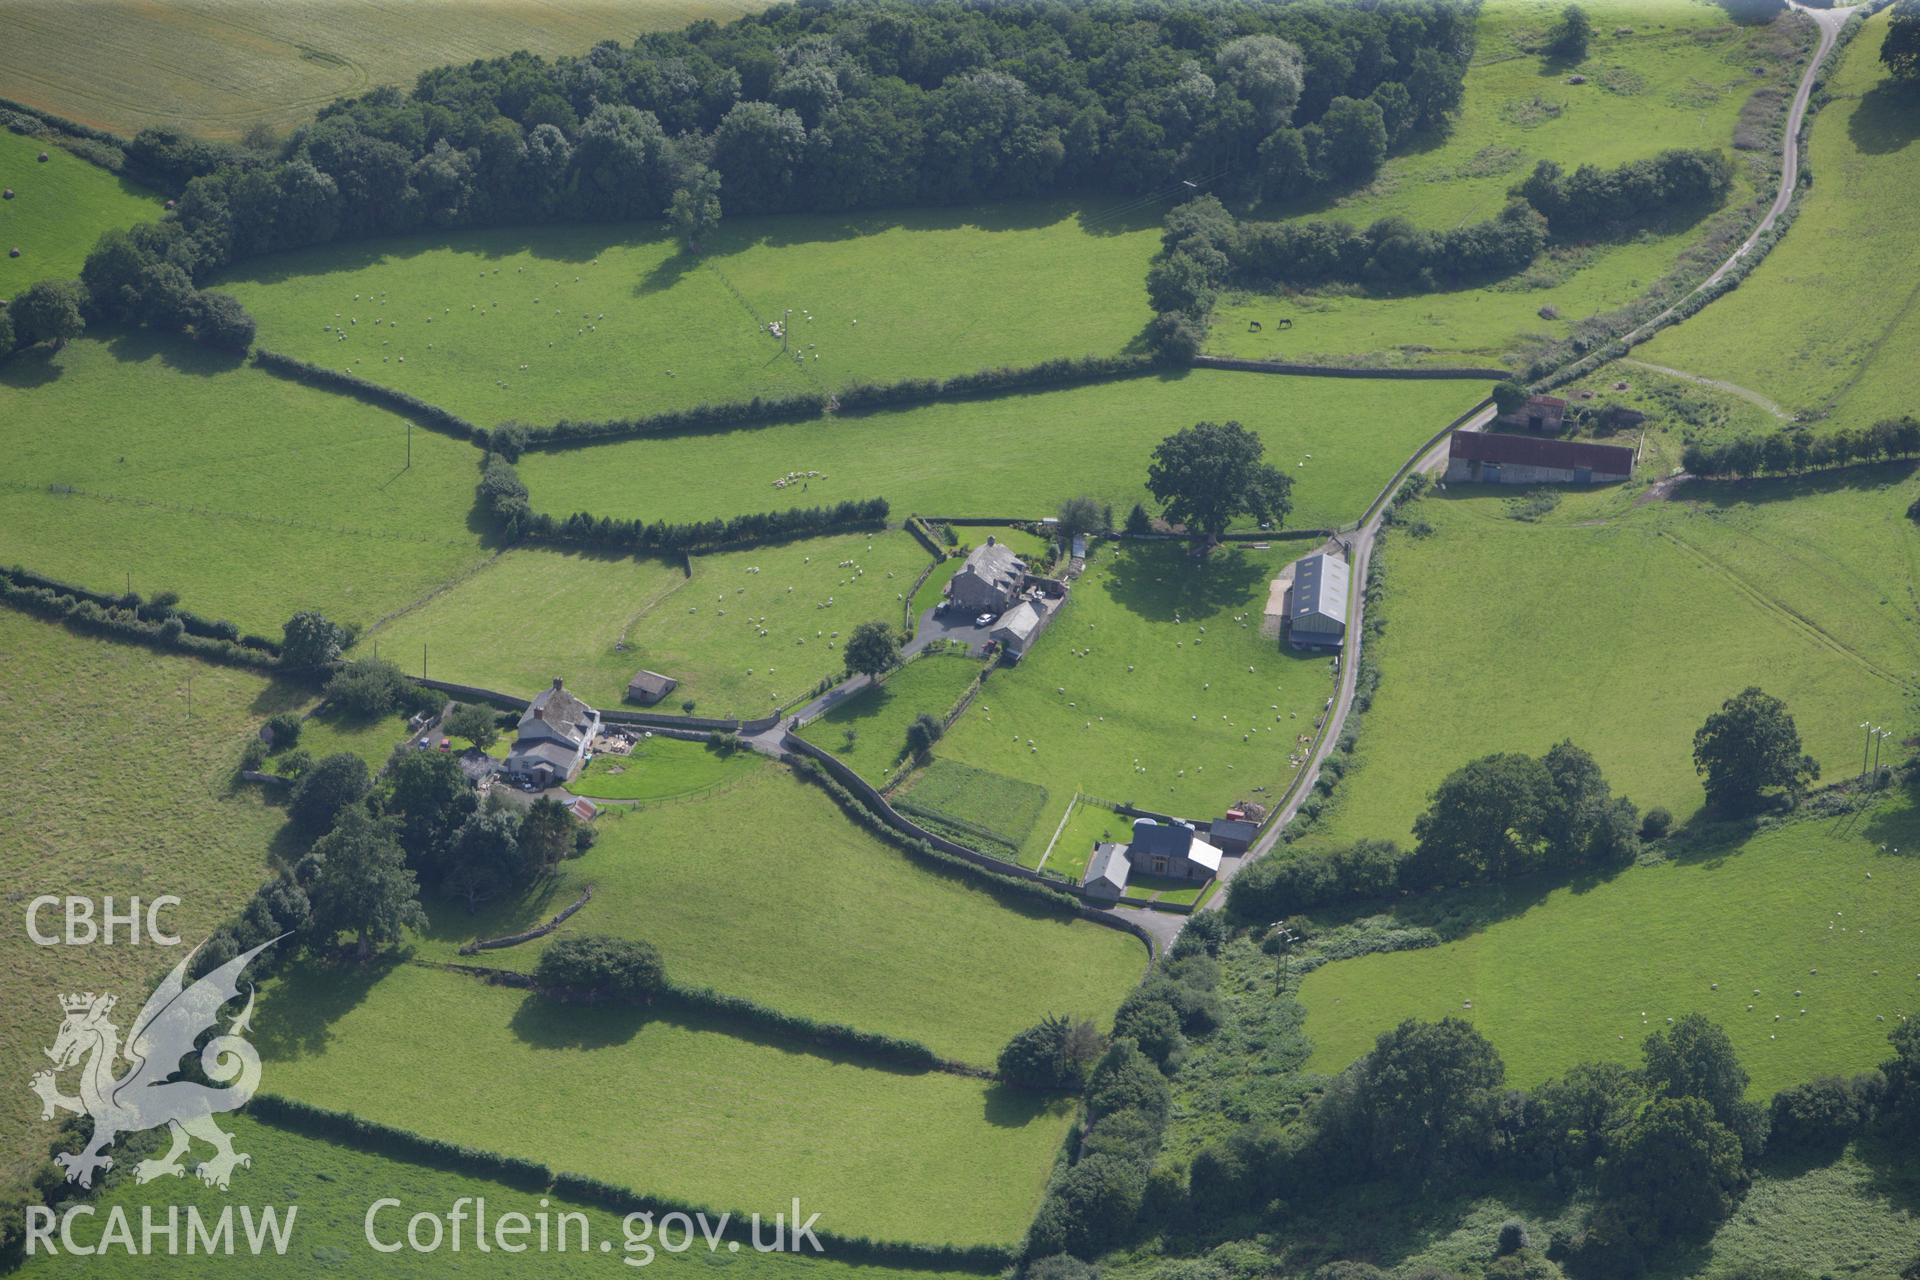 RCAHMW colour oblique aerial photograph of Castell Madoc Ringwork. Taken on 23 July 2009 by Toby Driver